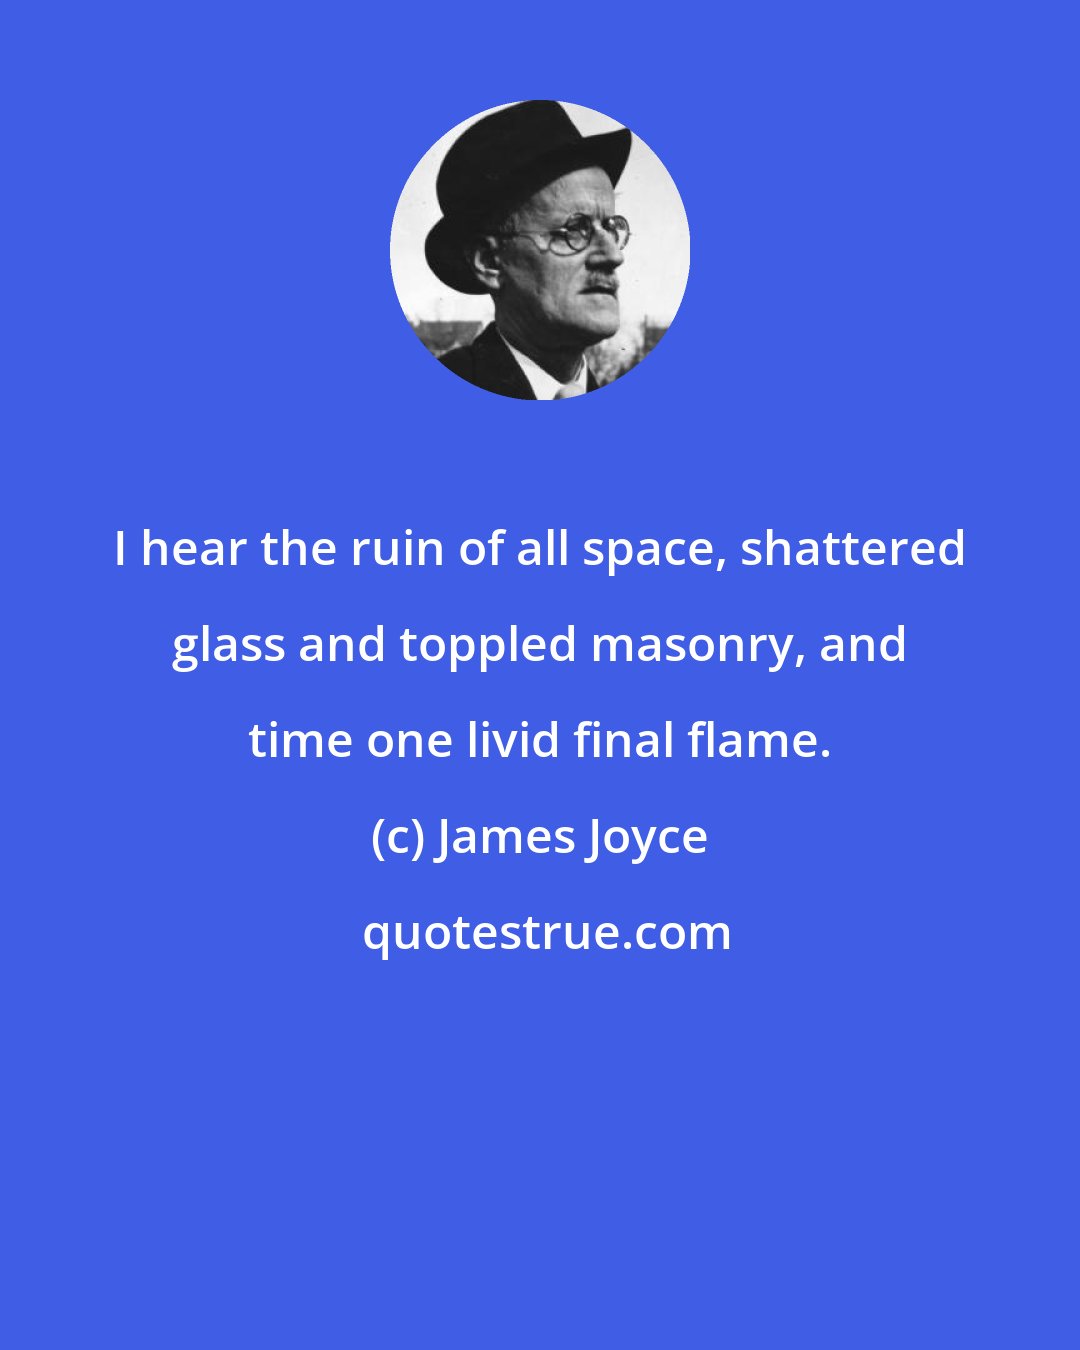 James Joyce: I hear the ruin of all space, shattered glass and toppled masonry, and time one livid final flame.